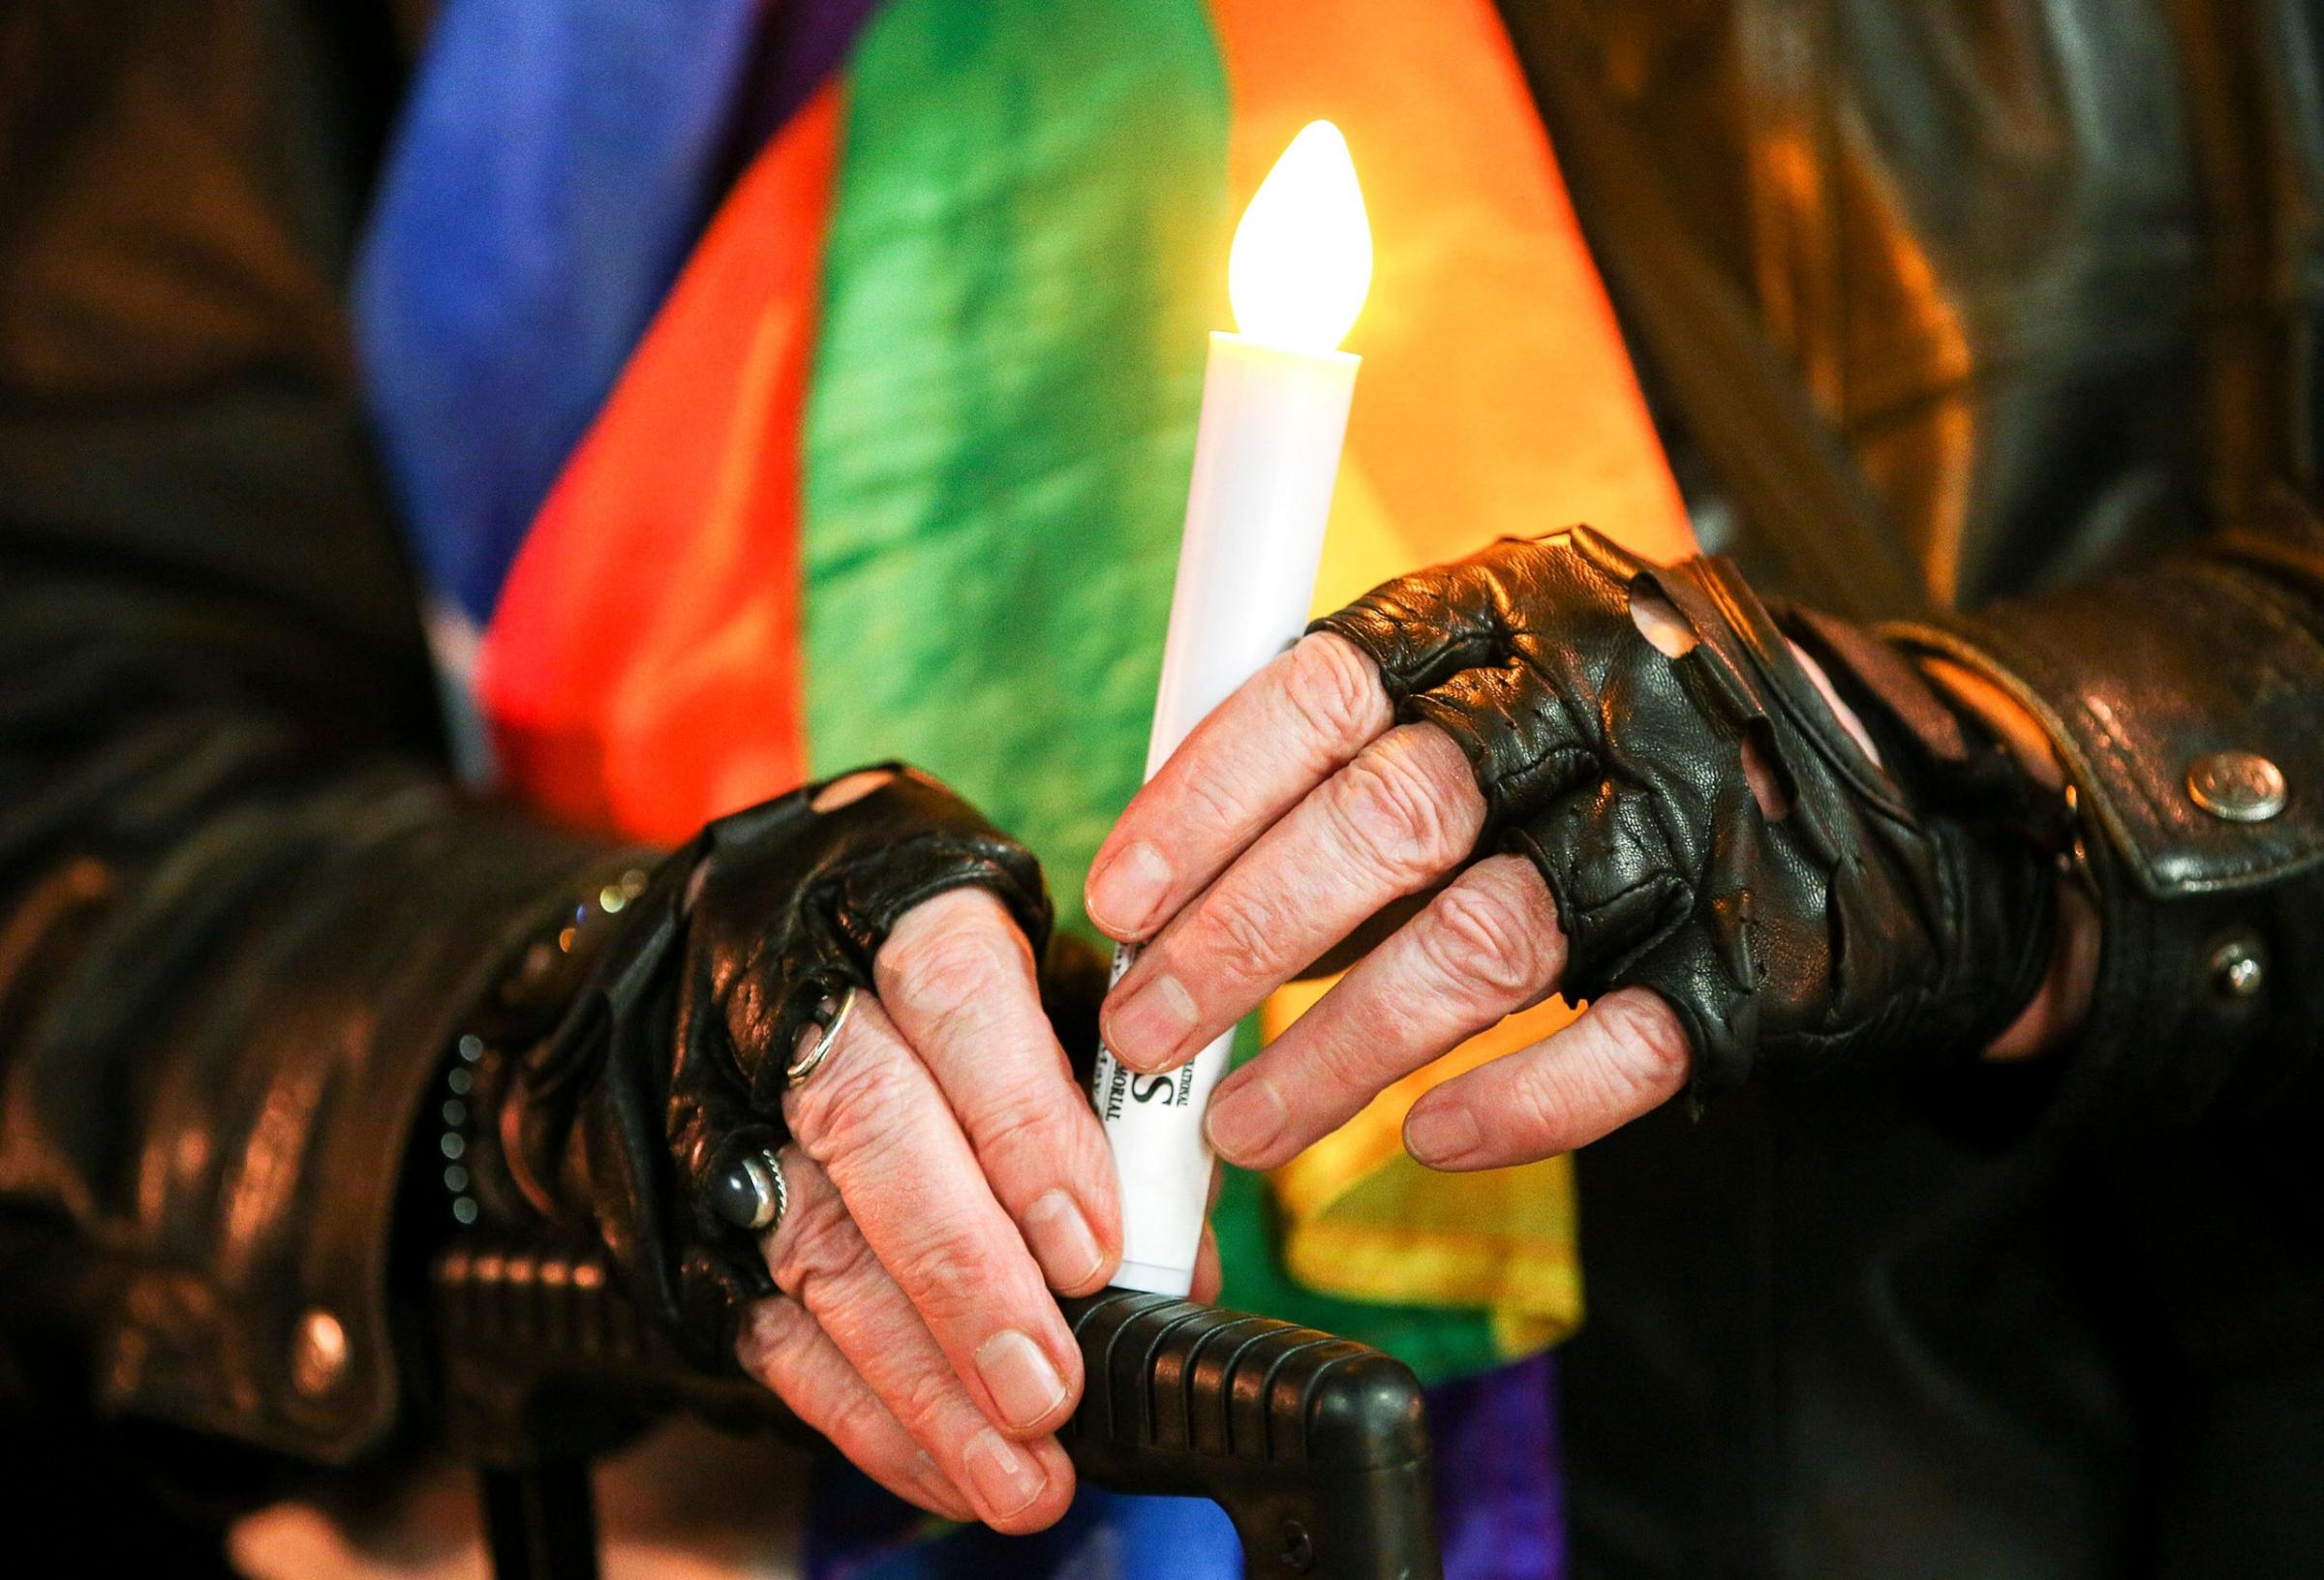 A member of the public holds a candle during a candlelight vigil for the victims of the Pulse Nightclub shooting in Orlando, at Frank Kitts Park in Wellington, June 13 2016.